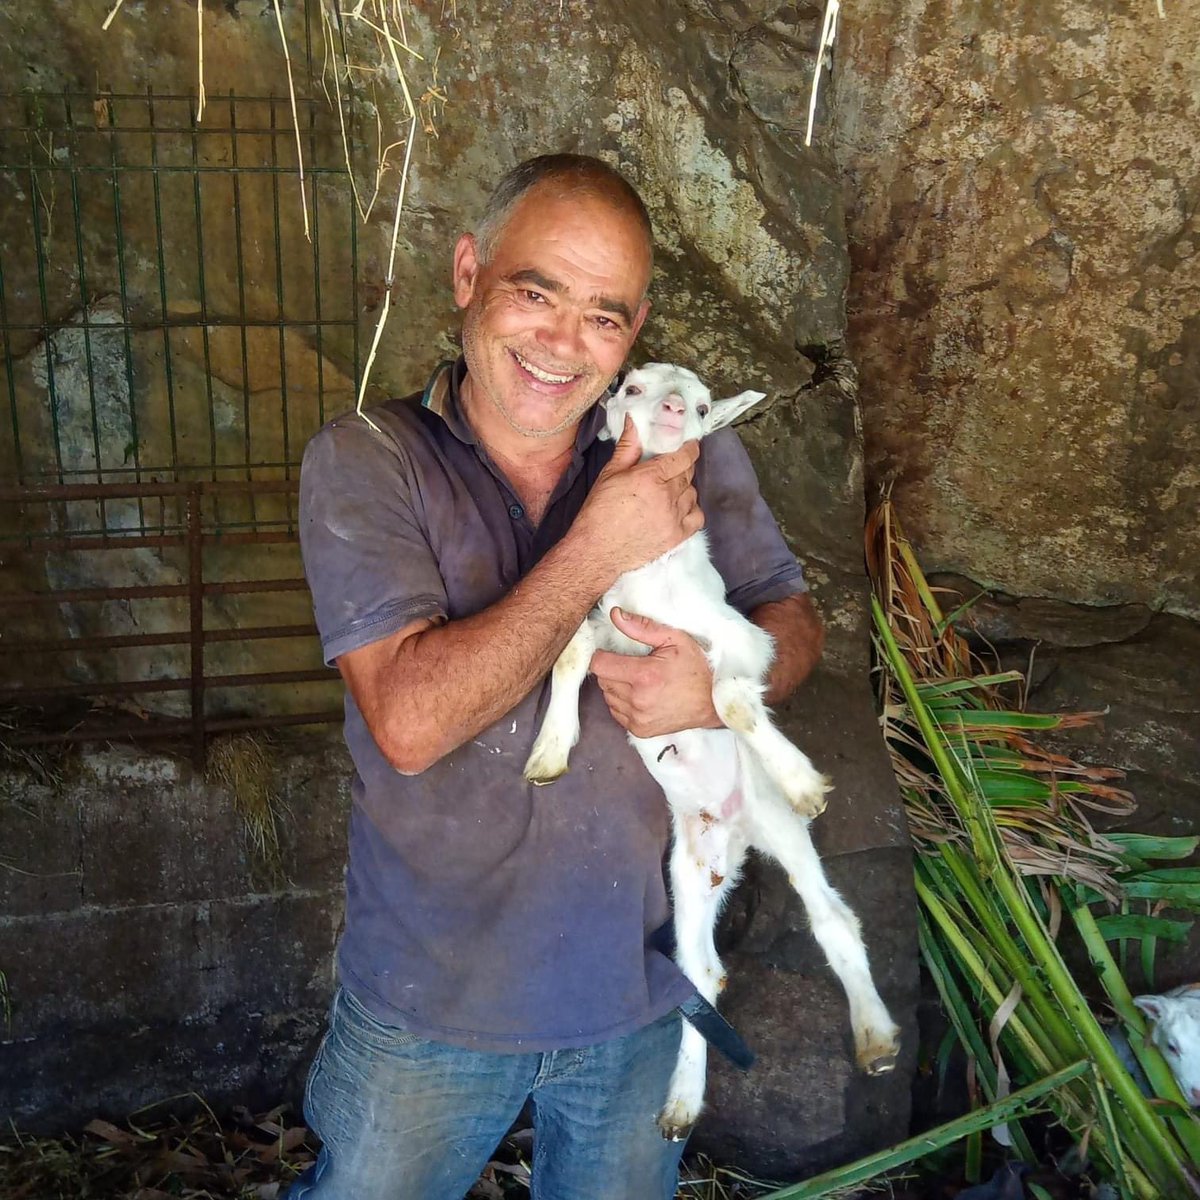 🇬🇧 Today marks a special day on the calendar. We would like to wish Luis, our groundskeeper a very special happy birthday 🥳

This man plays a special role on the hotel farm and has the utmost care and love for our farm animals.

#birthdayboy #FelizAniversario #goat  #farmanimal